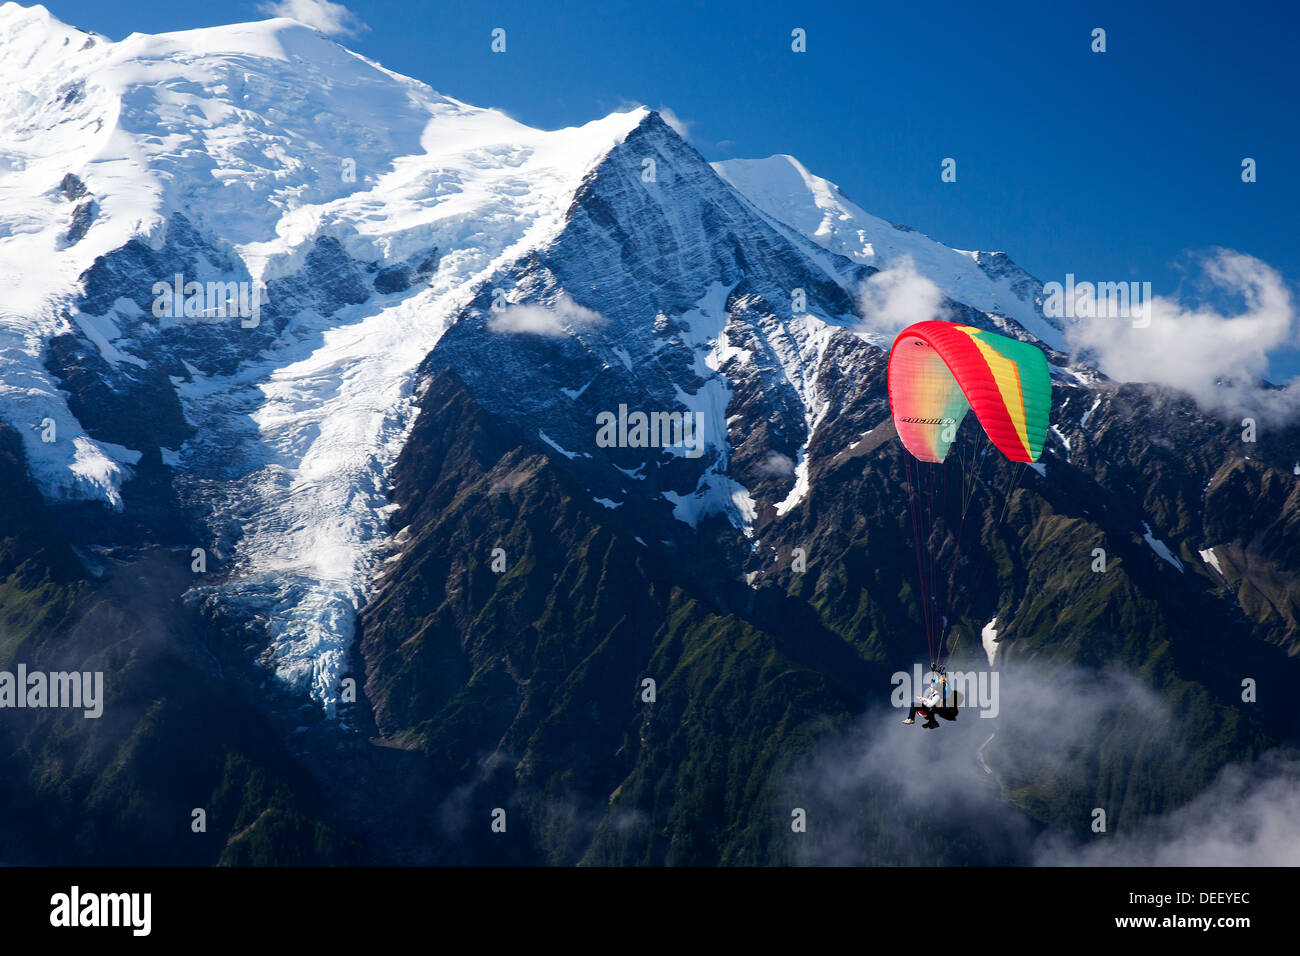 Paraglider with the Mont Blanc Massif in the background Stock Photo